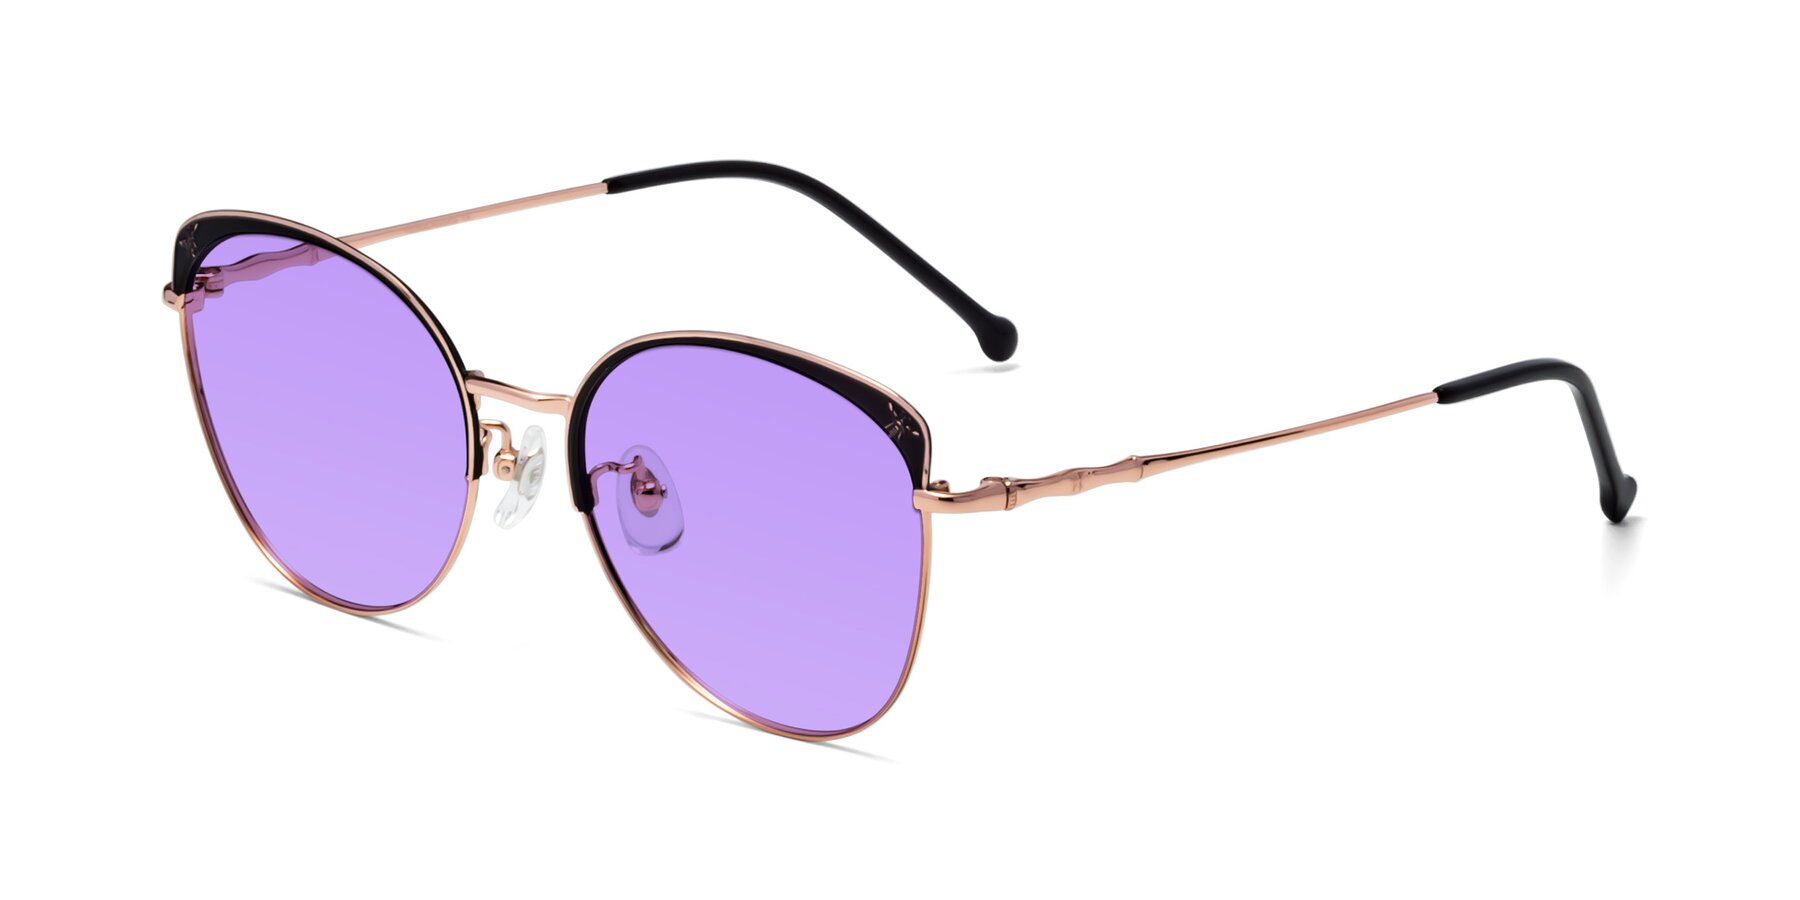 Angle of 18019 in Black-Rose Gold with Medium Purple Tinted Lenses